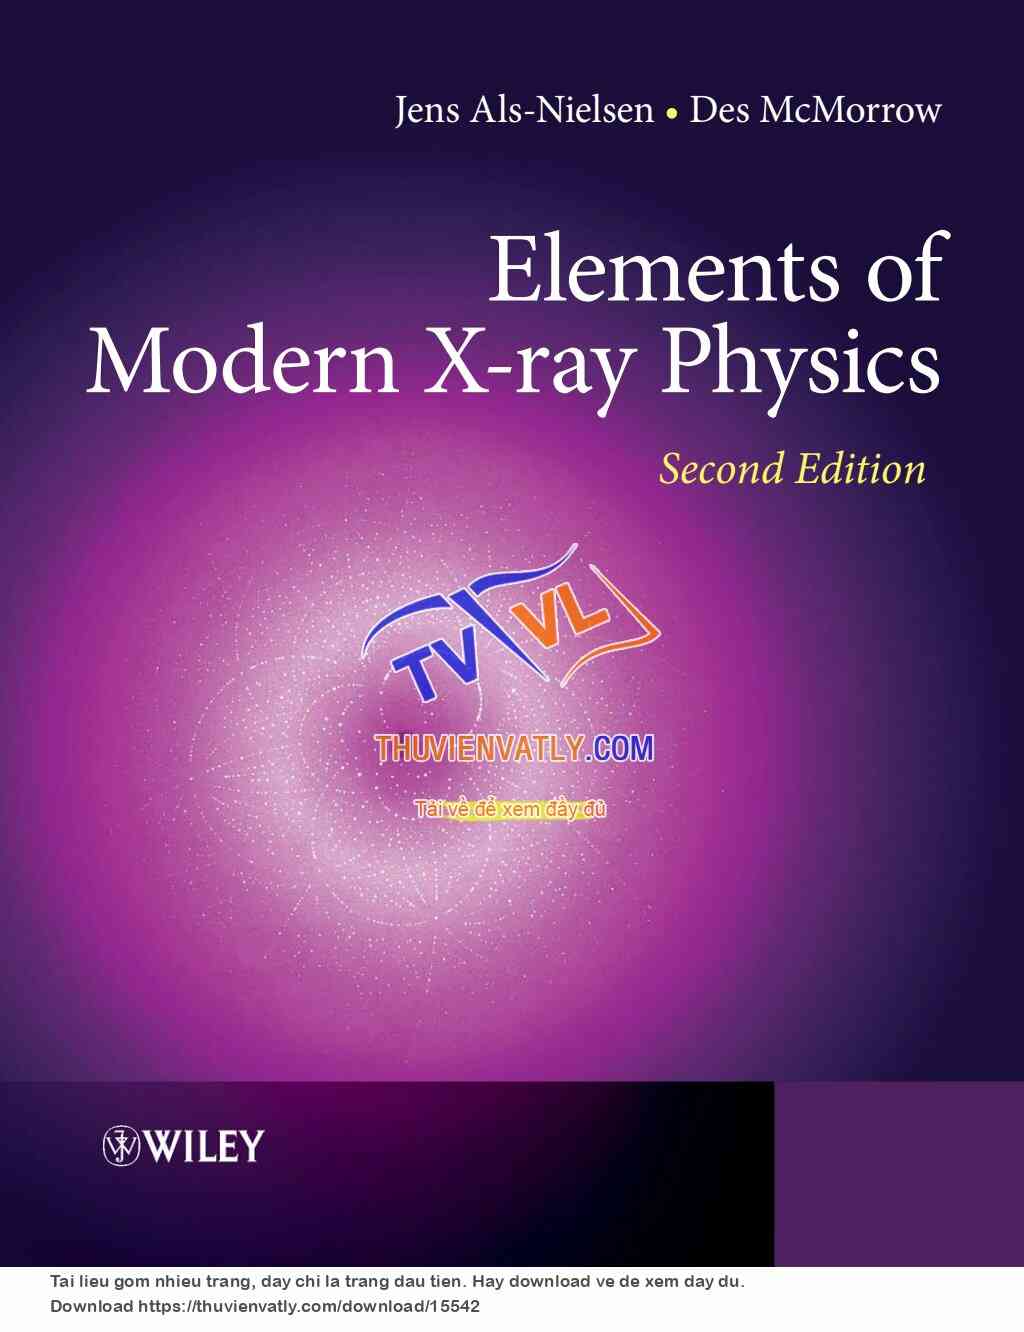 Elements of Modern X-ray Physics 2nd ed. - J. Als-Nielsen, et. al., (Wiley, 2011)